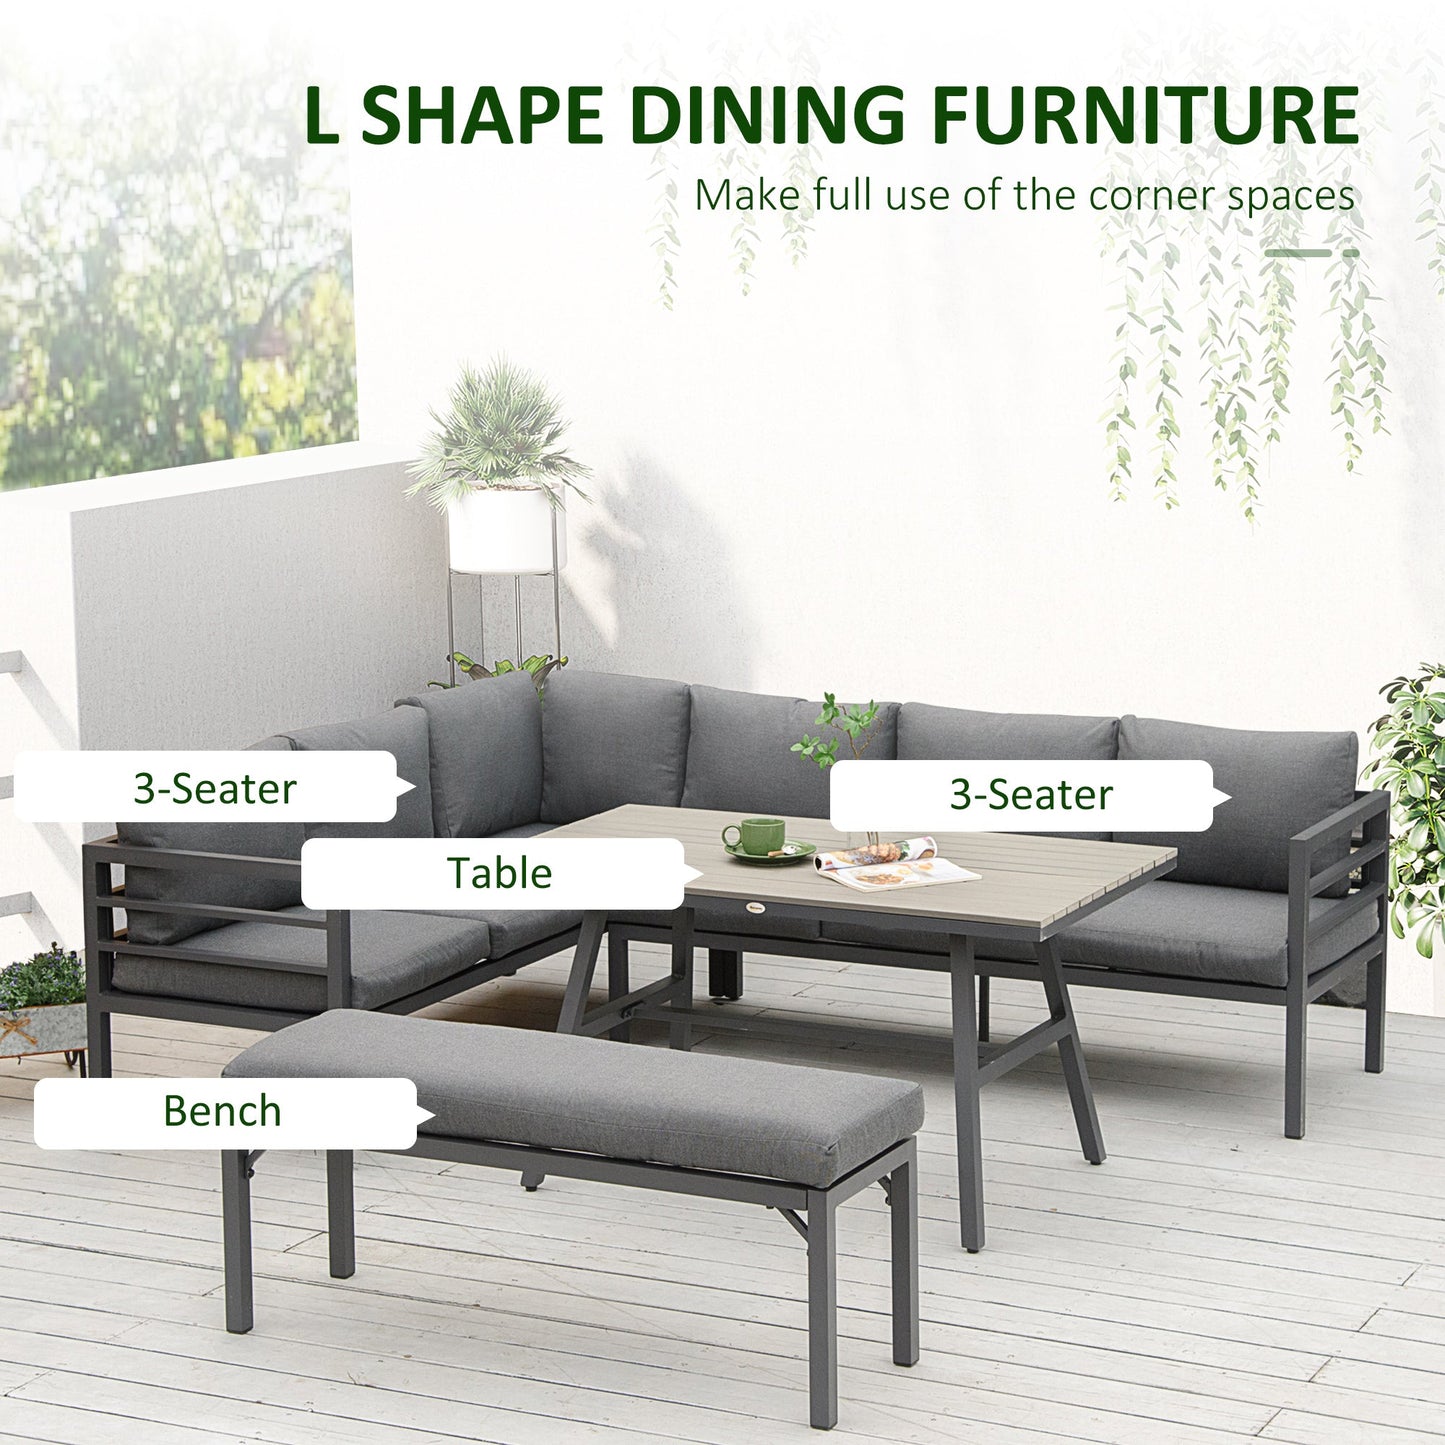 Outdoor and Garden-4 Piece Patio Furniture Set Aluminium Outdoor Dining Sofa Set Sectional Conversation Set w/ Bench, Dining Table & Cushions, Grey - Outdoor Style Company